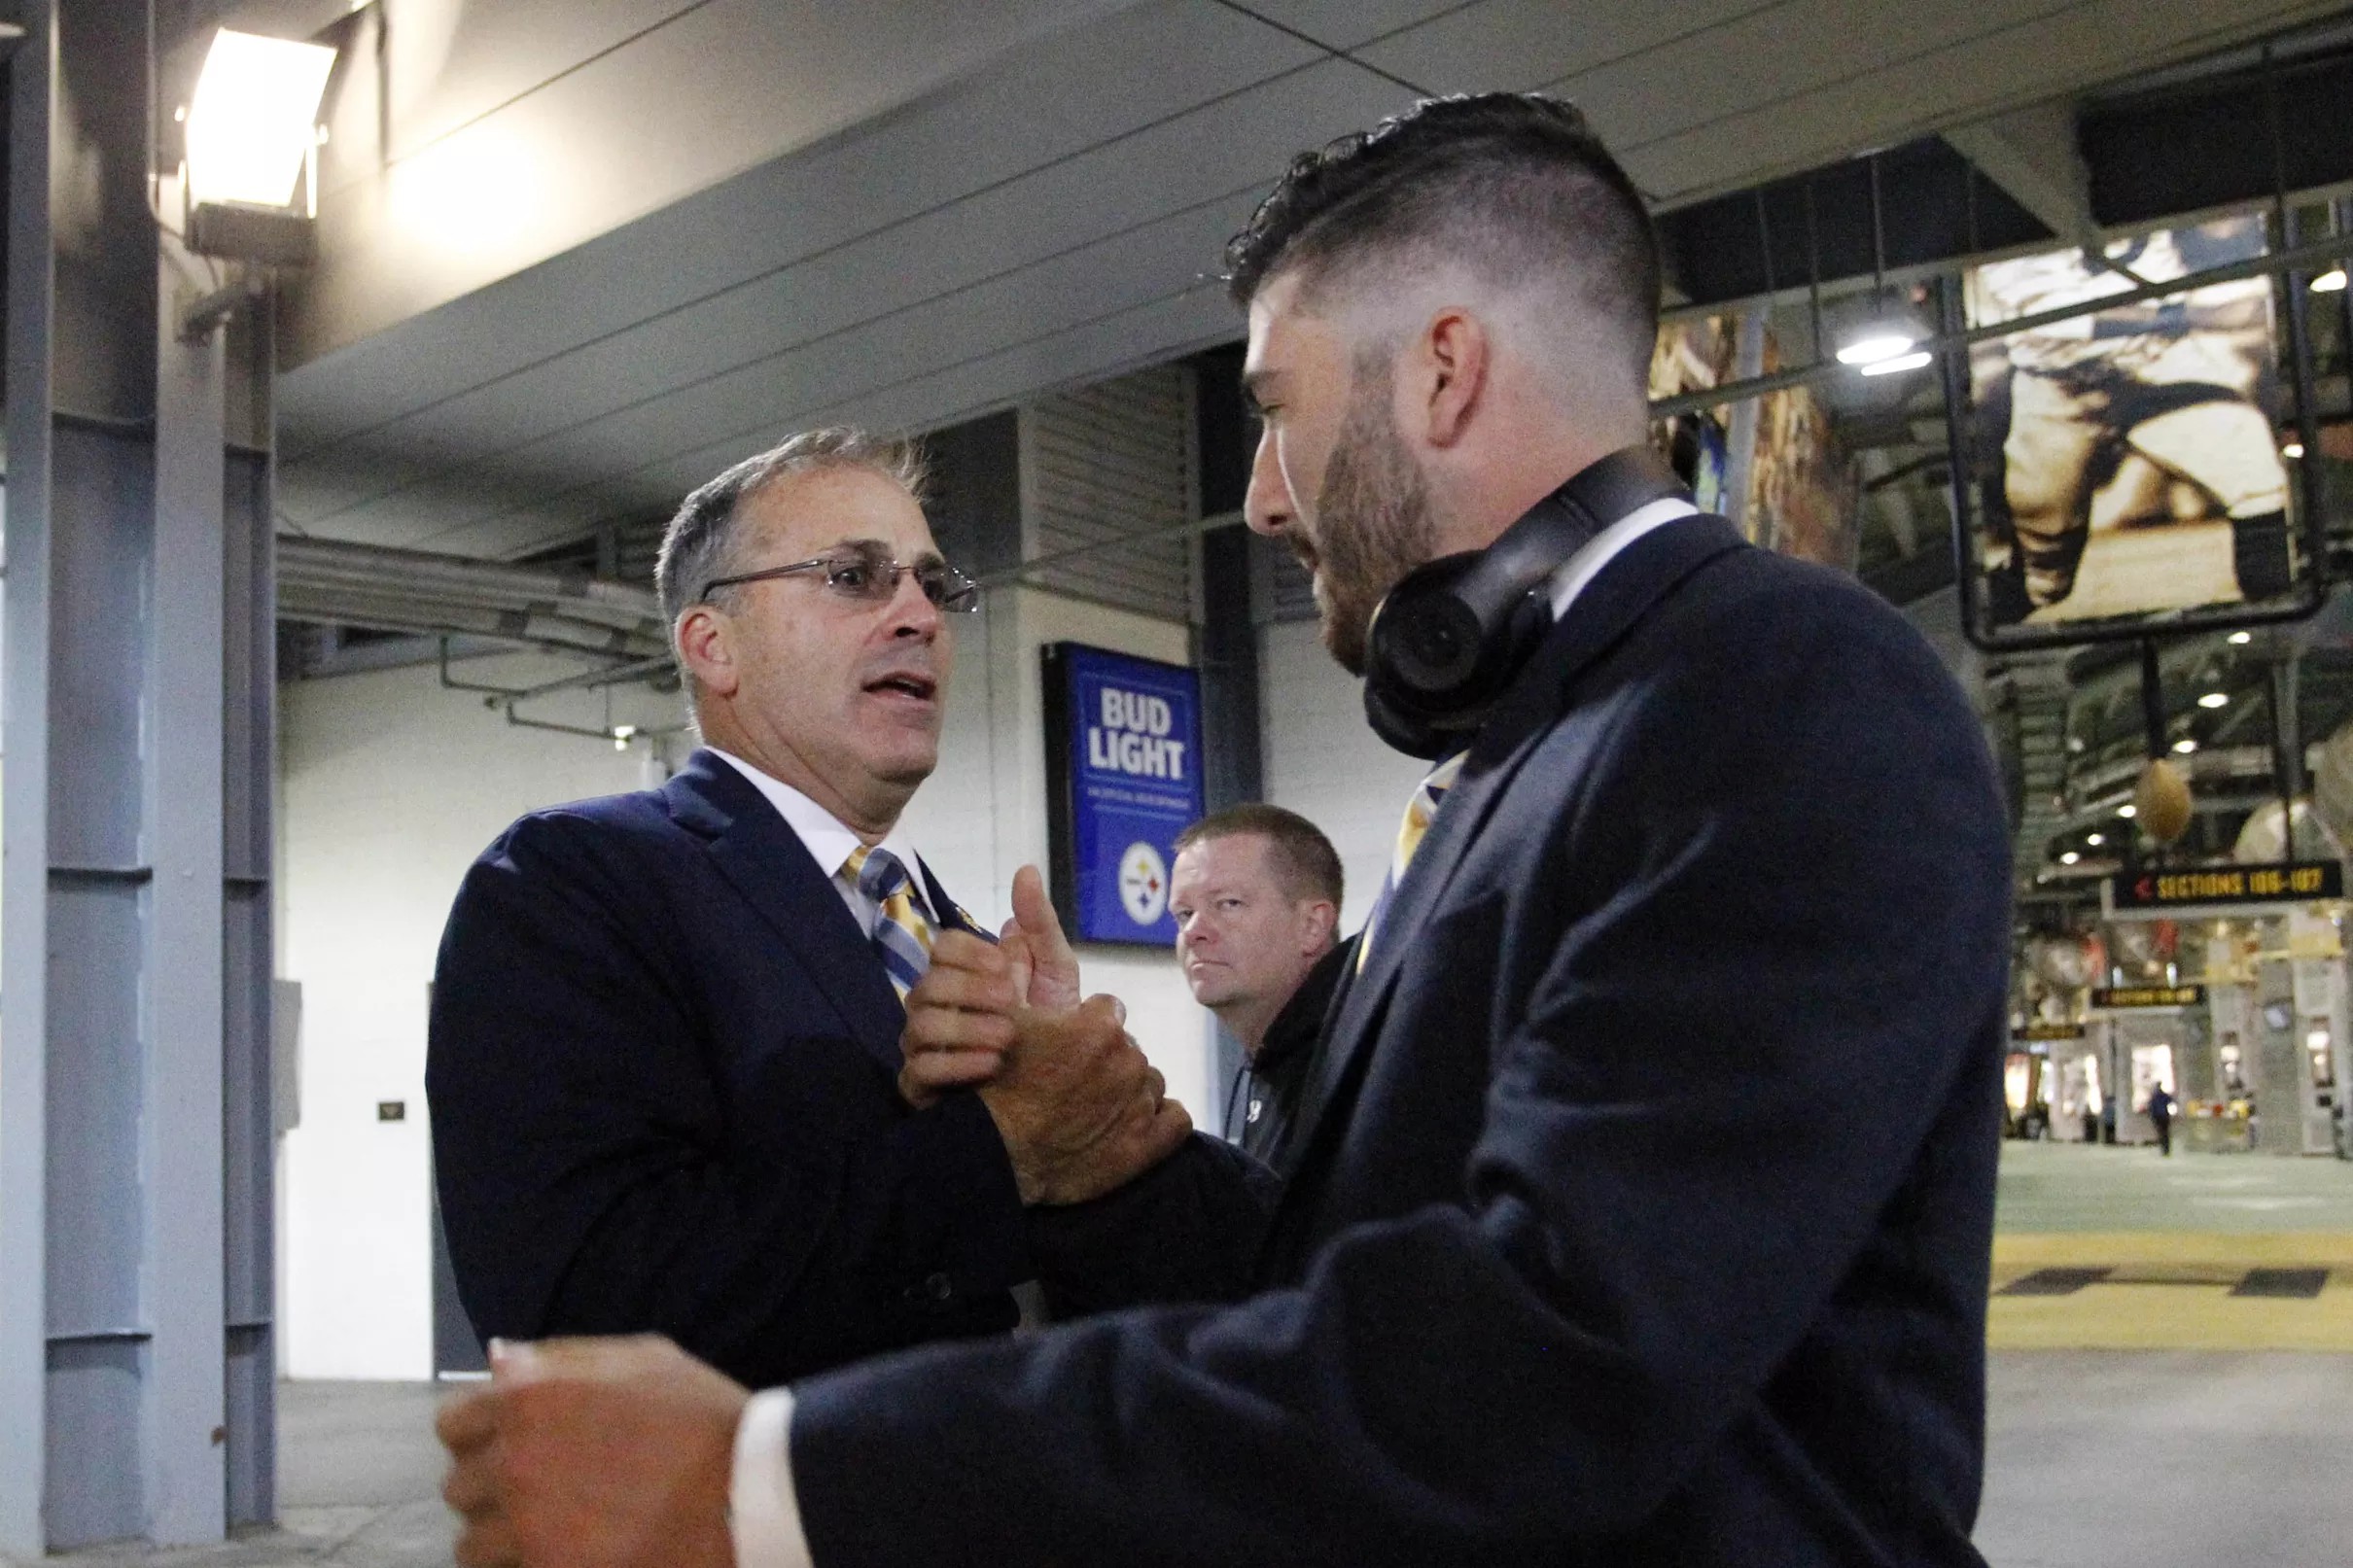 Pat Narduzzi and Ben DiNucci give conflicting statements on playing time